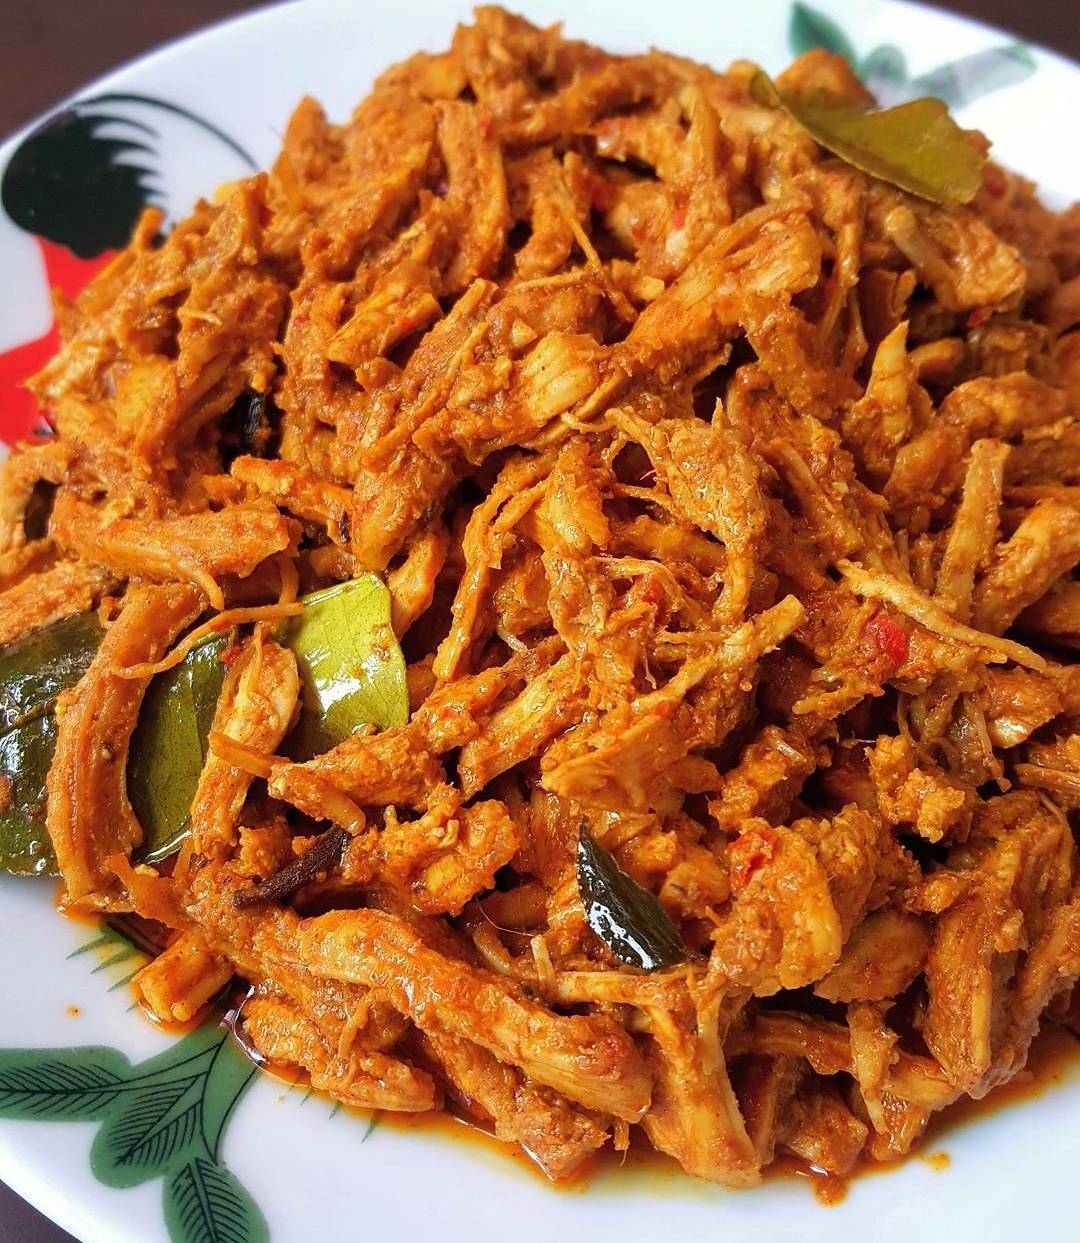 Resep Ayam Suwir / Shredded Chicken with spices - Resep Aye